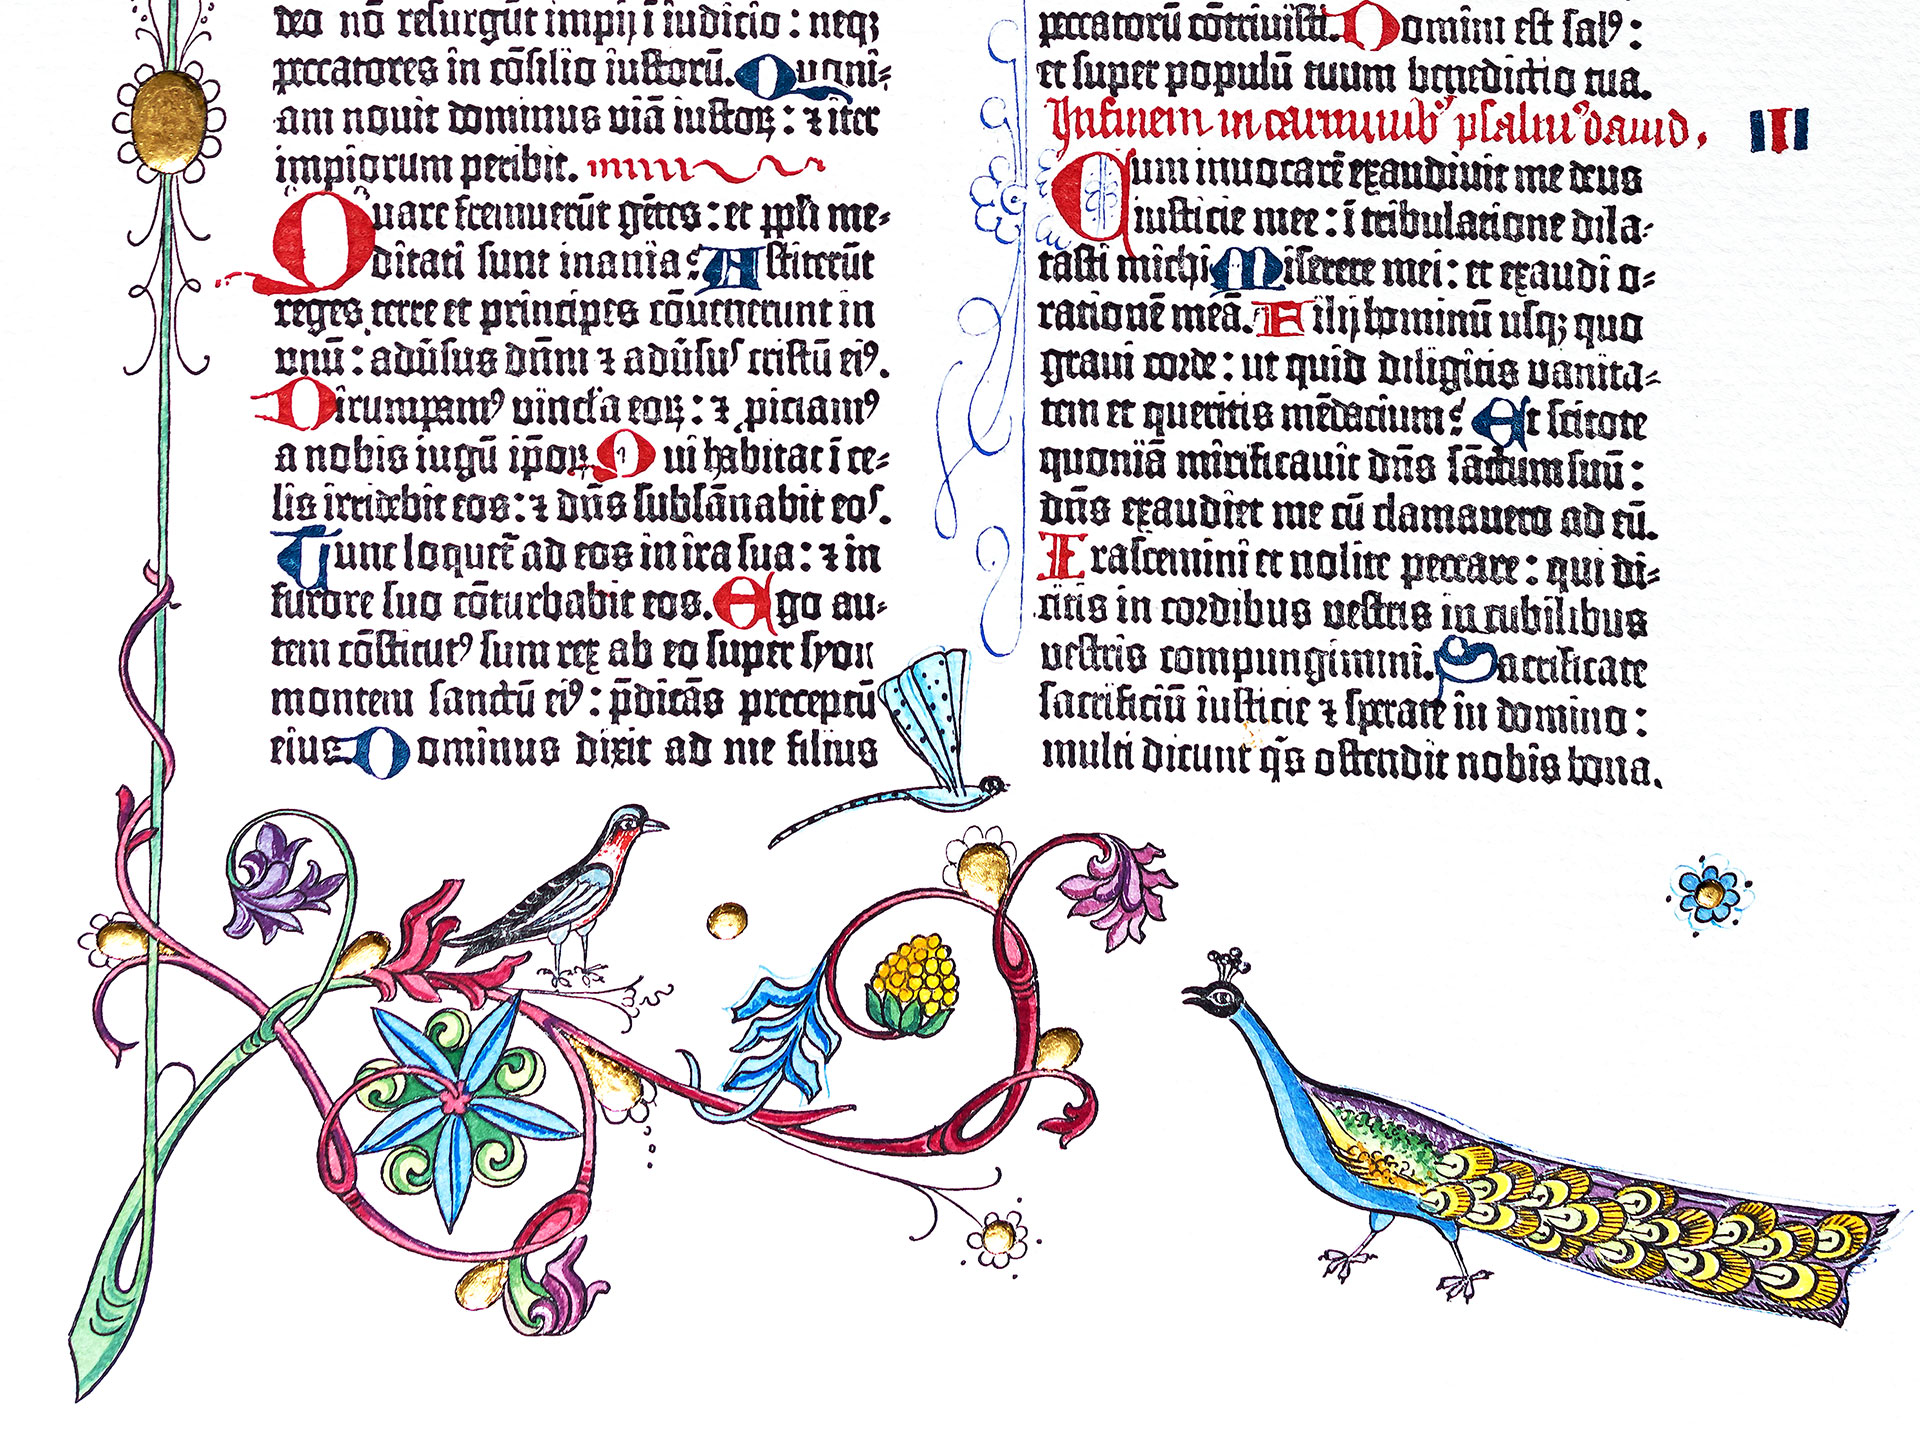 Psalm 1. Ornamental page from the Gutenberg Bible (Variation)